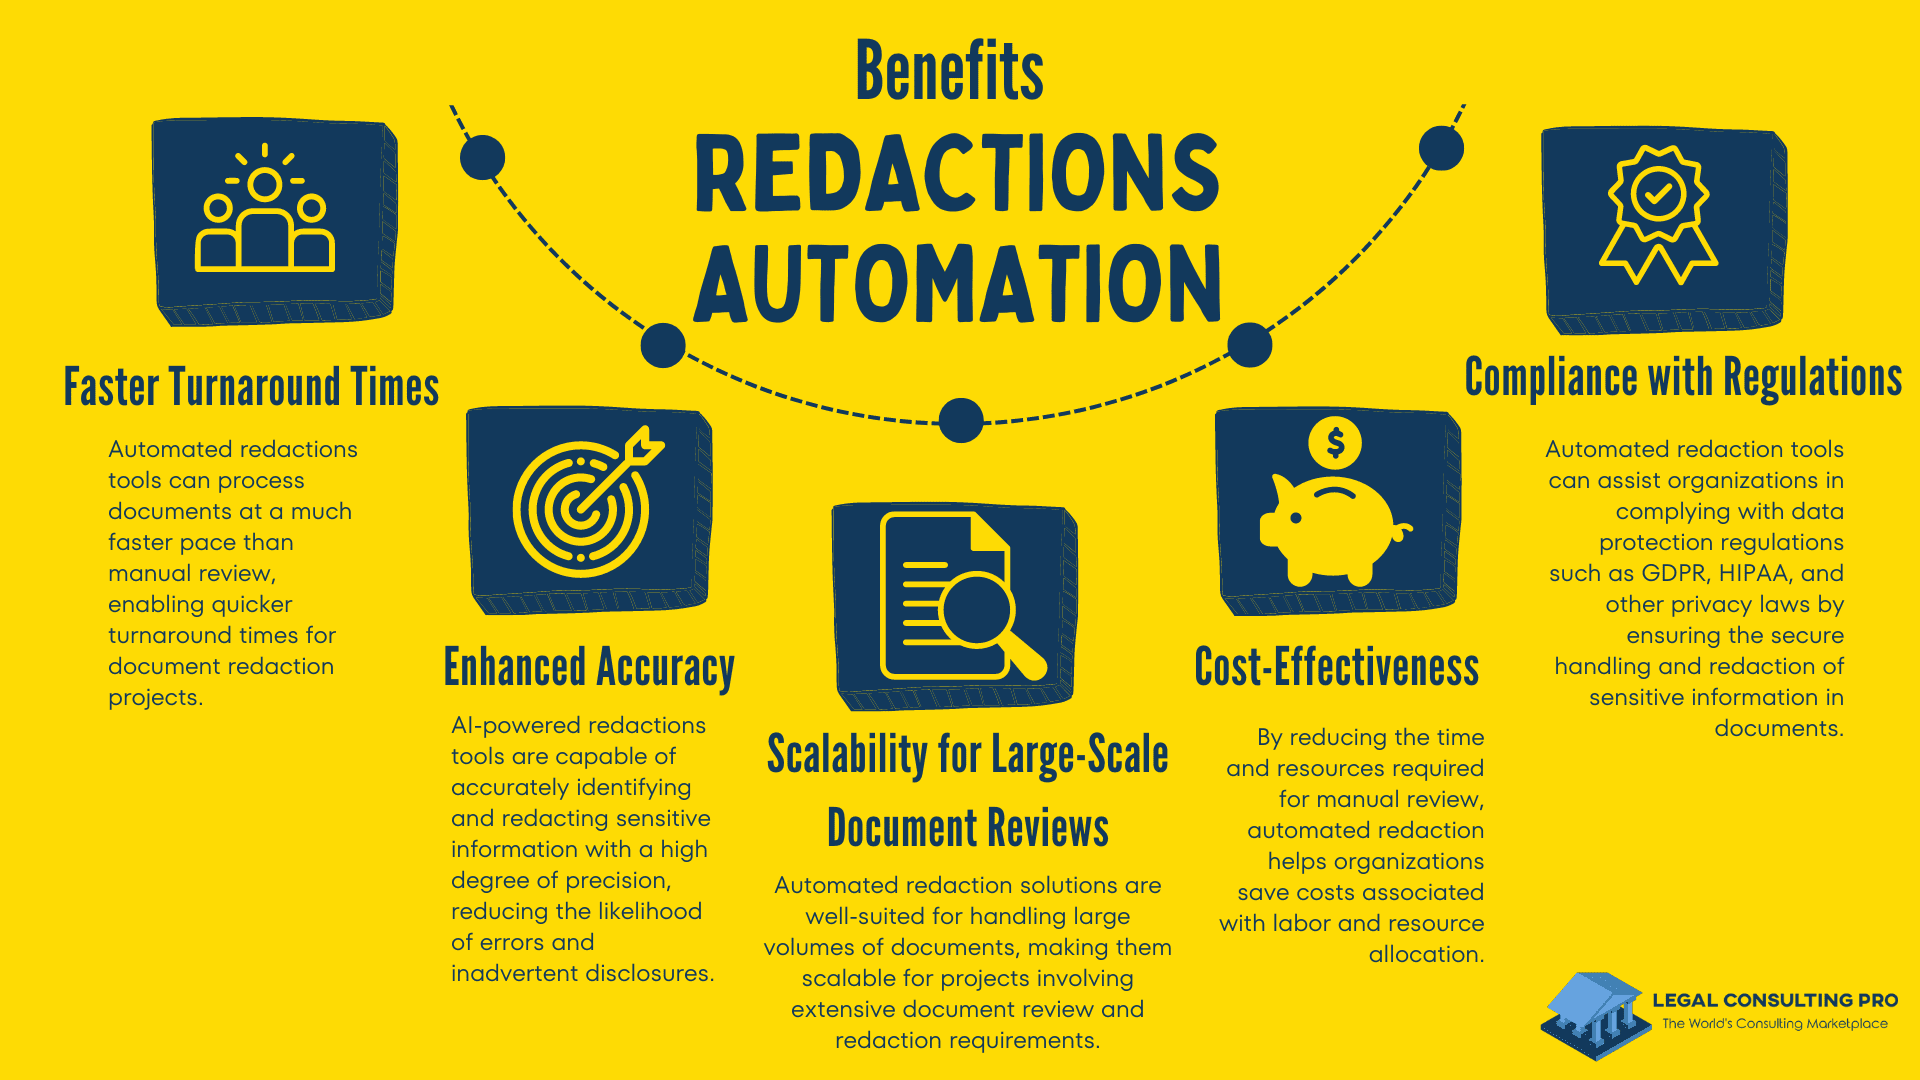 Benefits of Redactions Automation Infographic